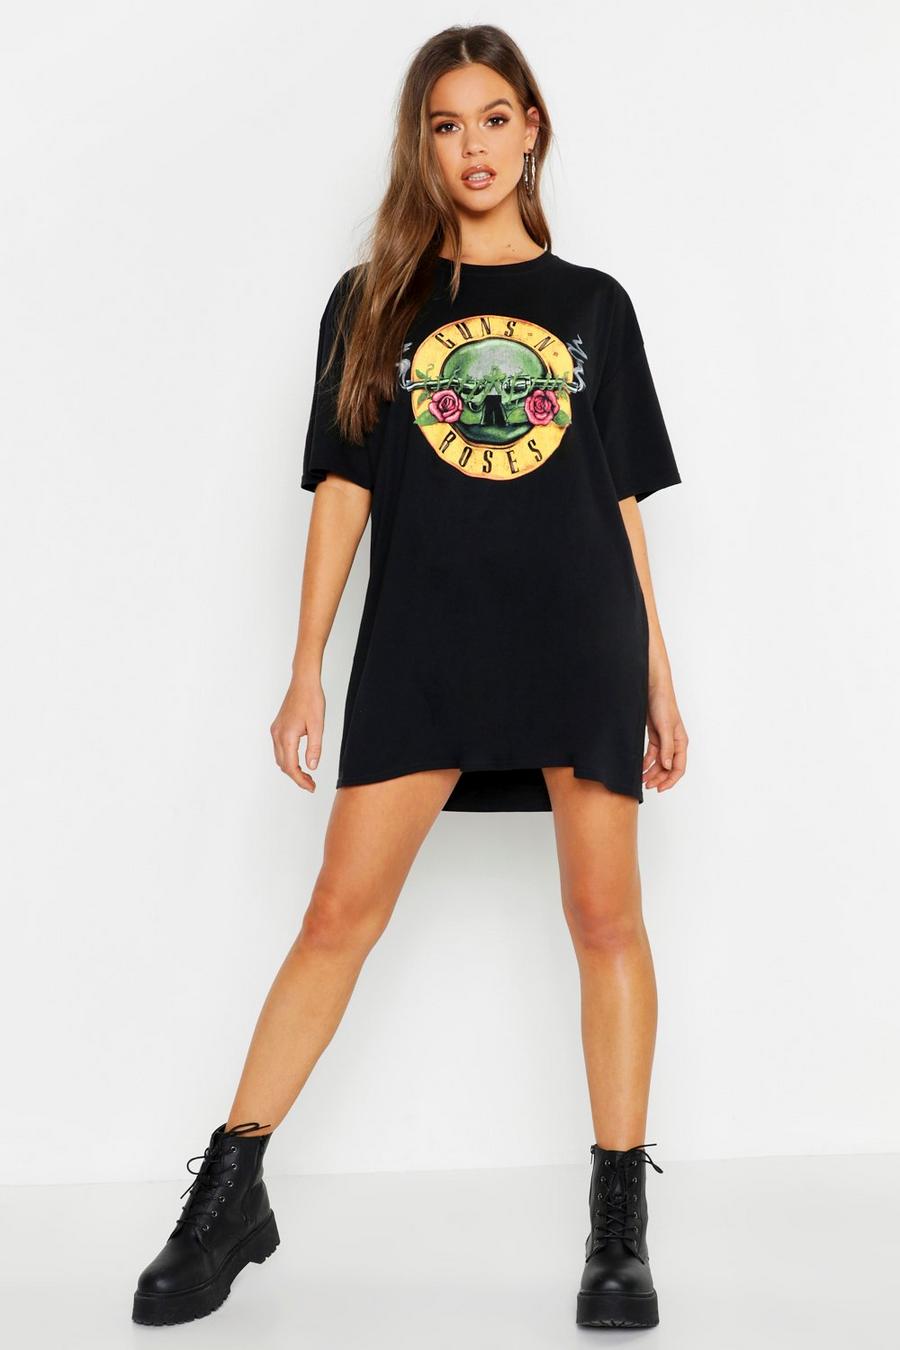 Abito T-shirt oversize ufficiale con stampa classica Guns N Roses, Nero image number 1